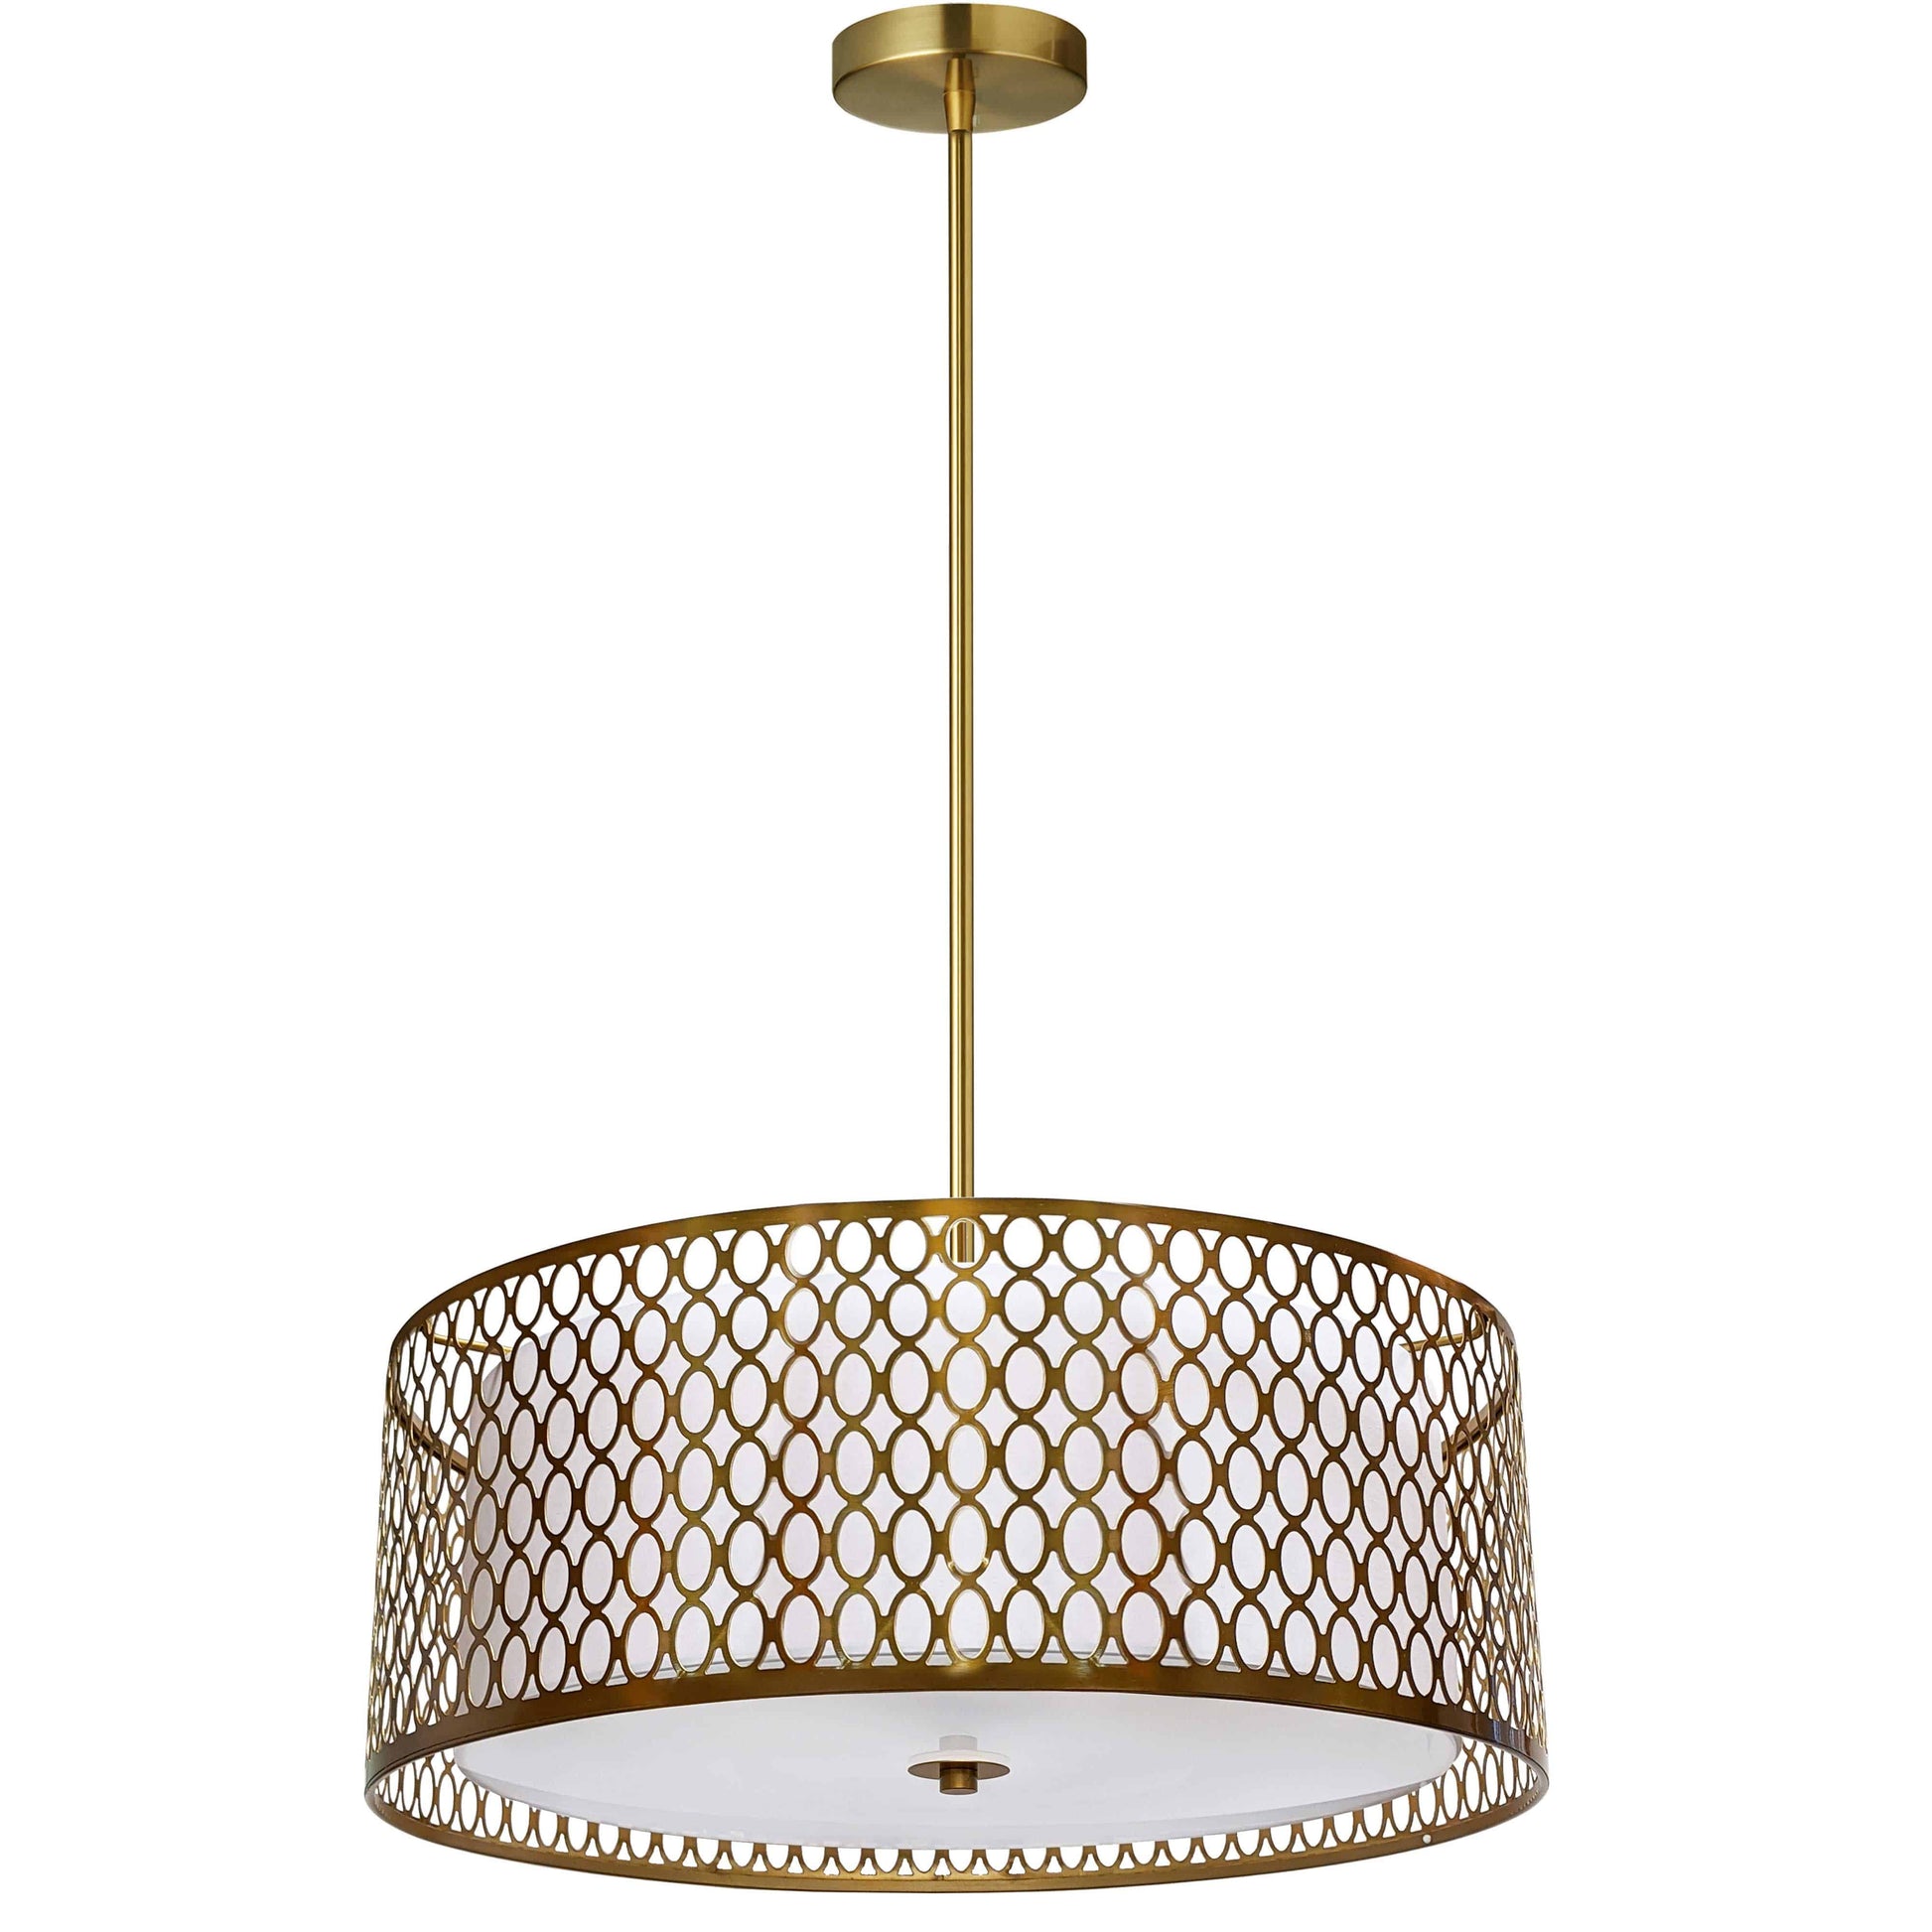 Dainolite 3 Light Aged Brass Pendant with White Shade and Laser Cut Outer. - Renoz